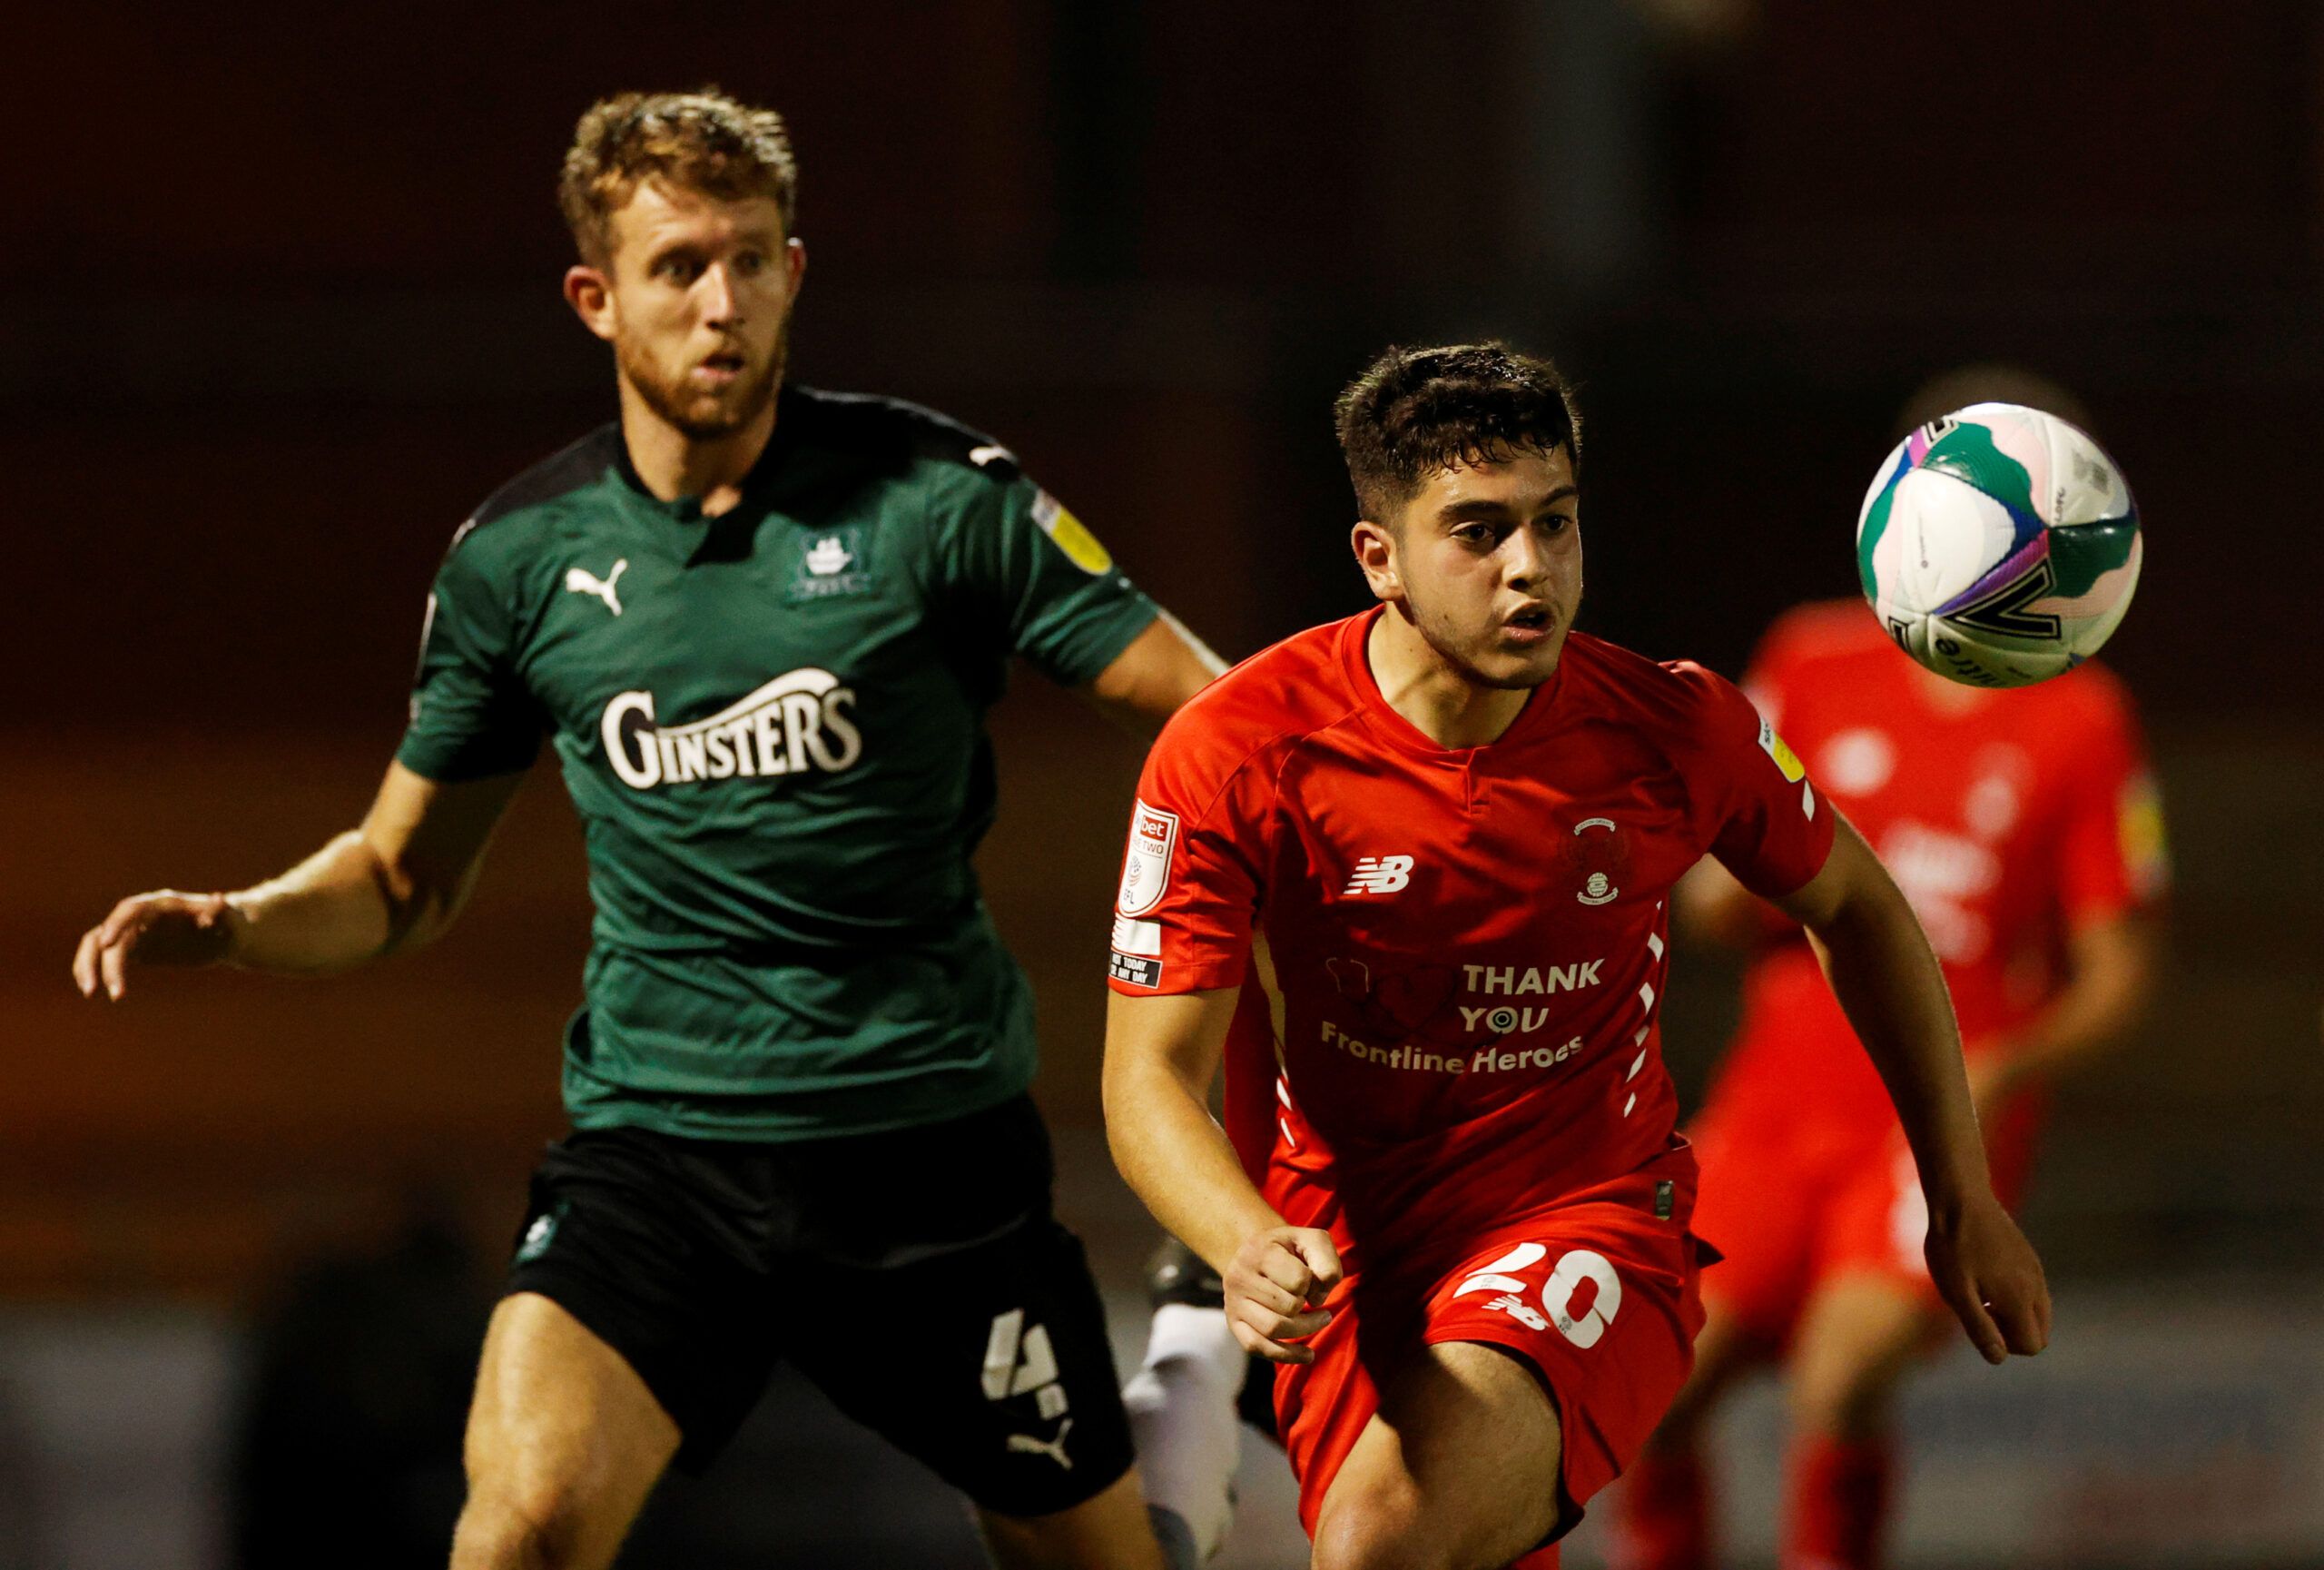 Soccer Football - Carabao Cup Second Round - Leyton Orient v Plymouth Argyle - Matchroom Stadium, London, Britain - September 15, 2020  Leyton Orient's Ruel Sotiriou in action with Plymouth Argyle's Will Aimson  Action Images/John Sibley  EDITORIAL USE ONLY. No use with unauthorized audio, video, data, fixture lists, club/league logos or 